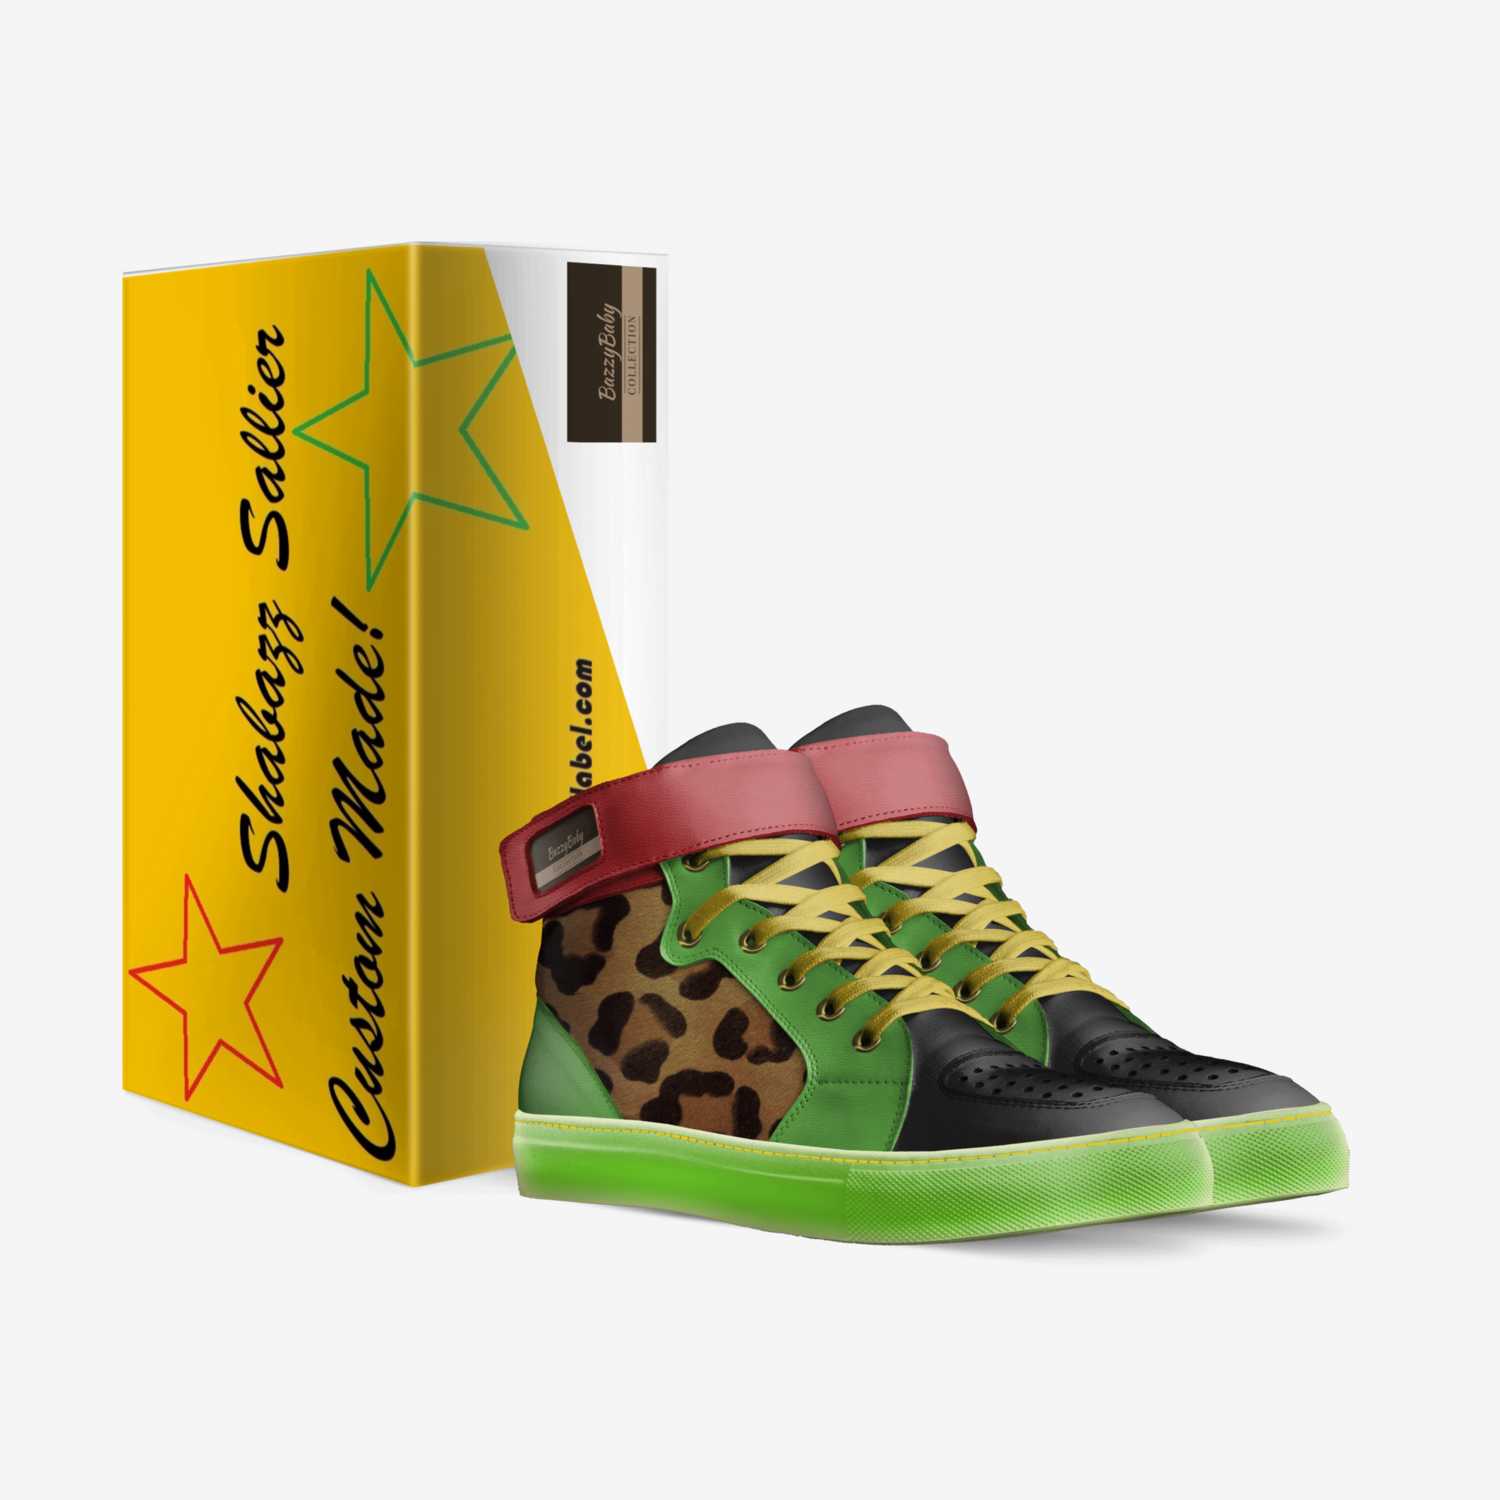 BazzyBaby custom made in Italy shoes by Shabazz Sallier | Box view